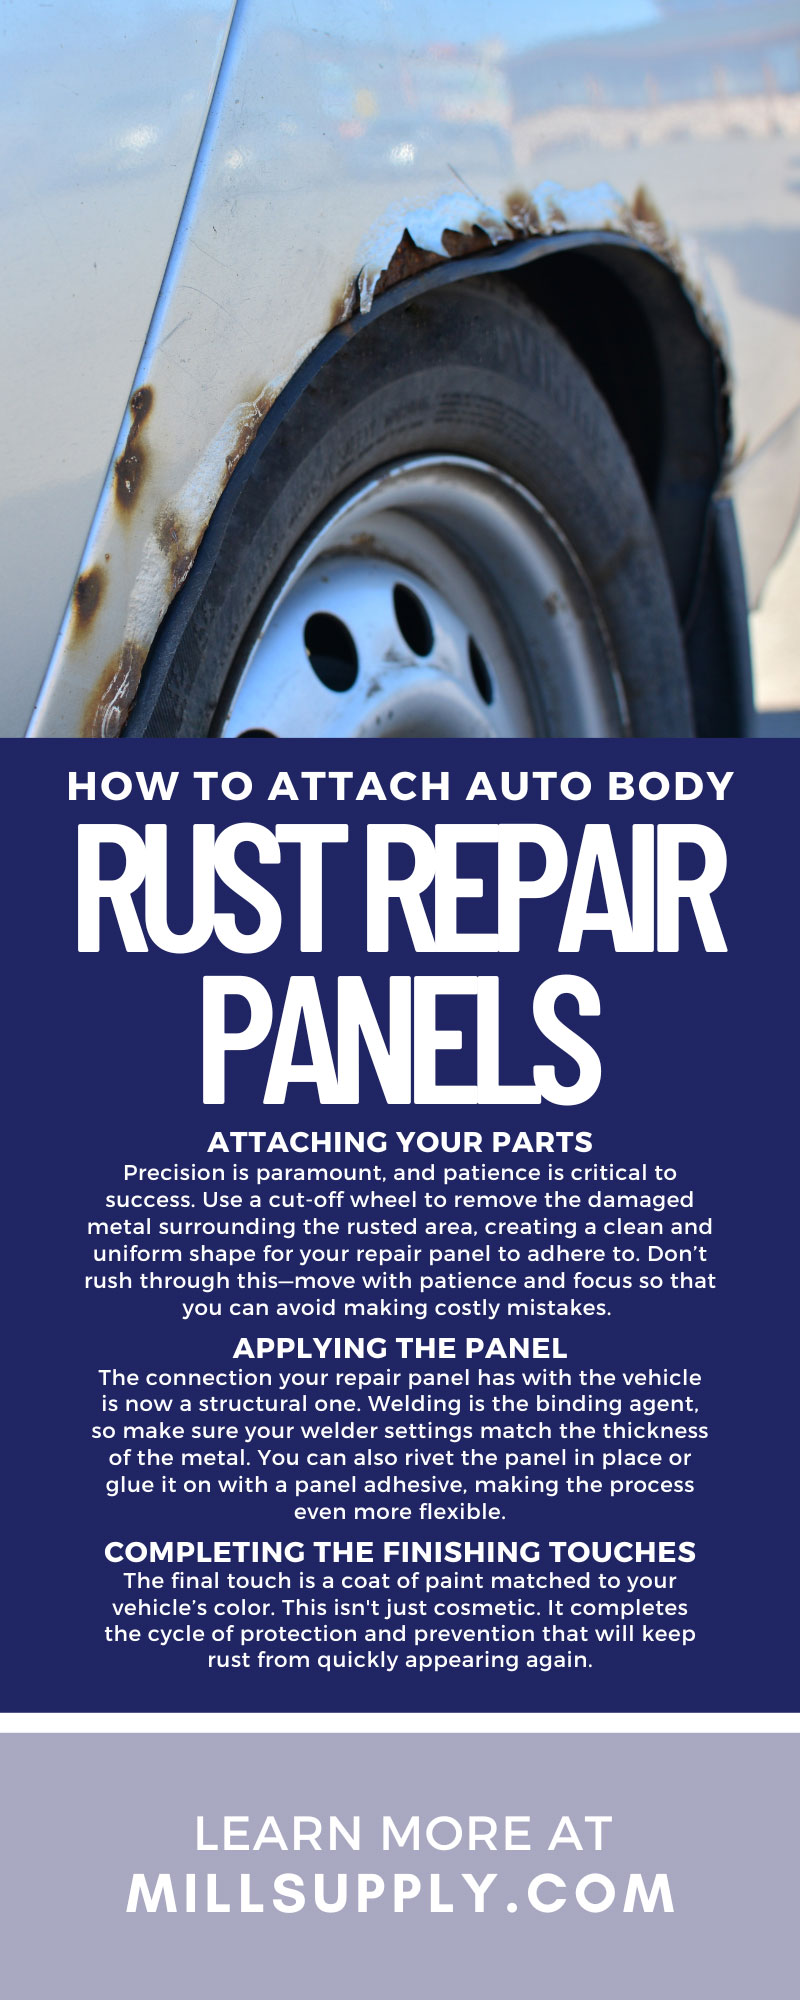 How To Attach Auto Body Rust Repair Panels